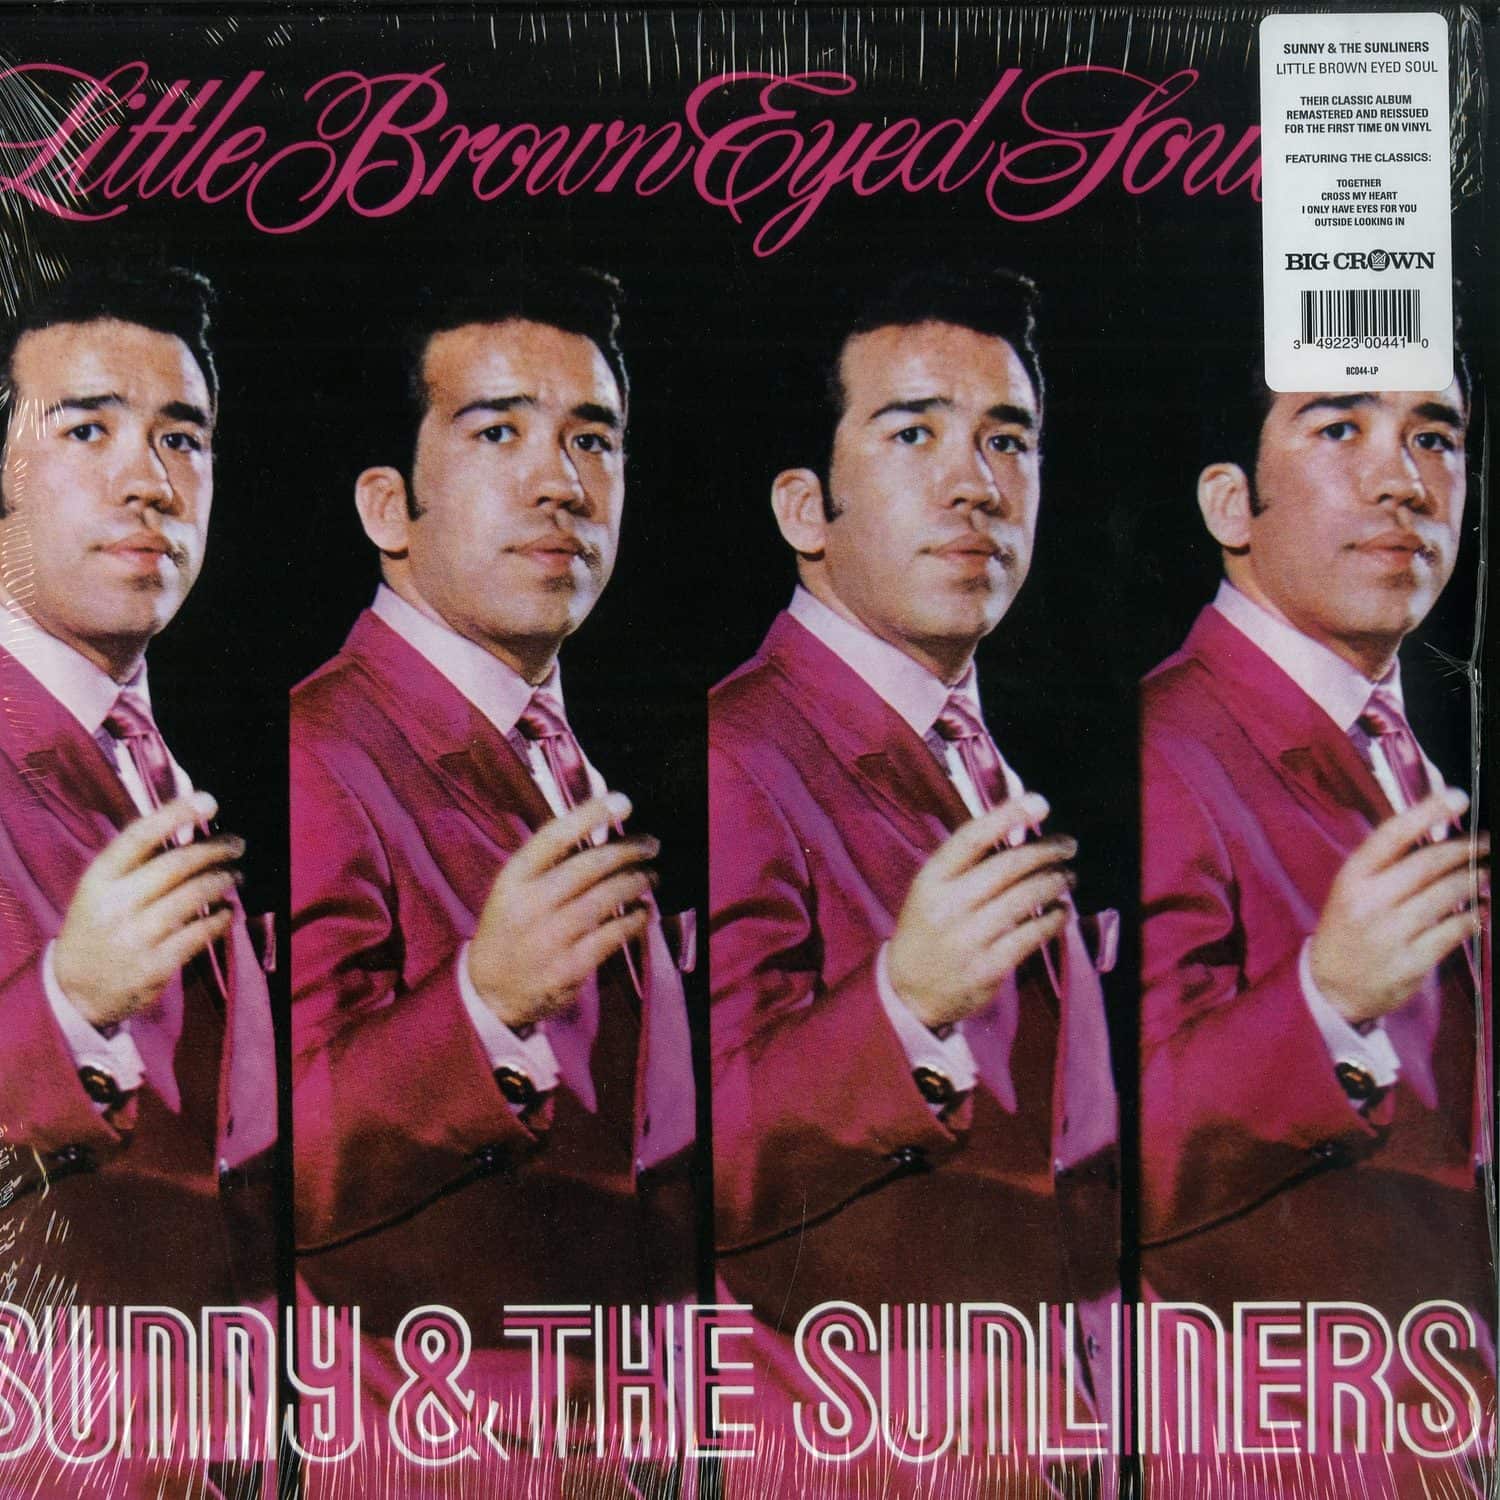 Sunny & The Sunliners - LITTLE BROWN  EYED SOUL 